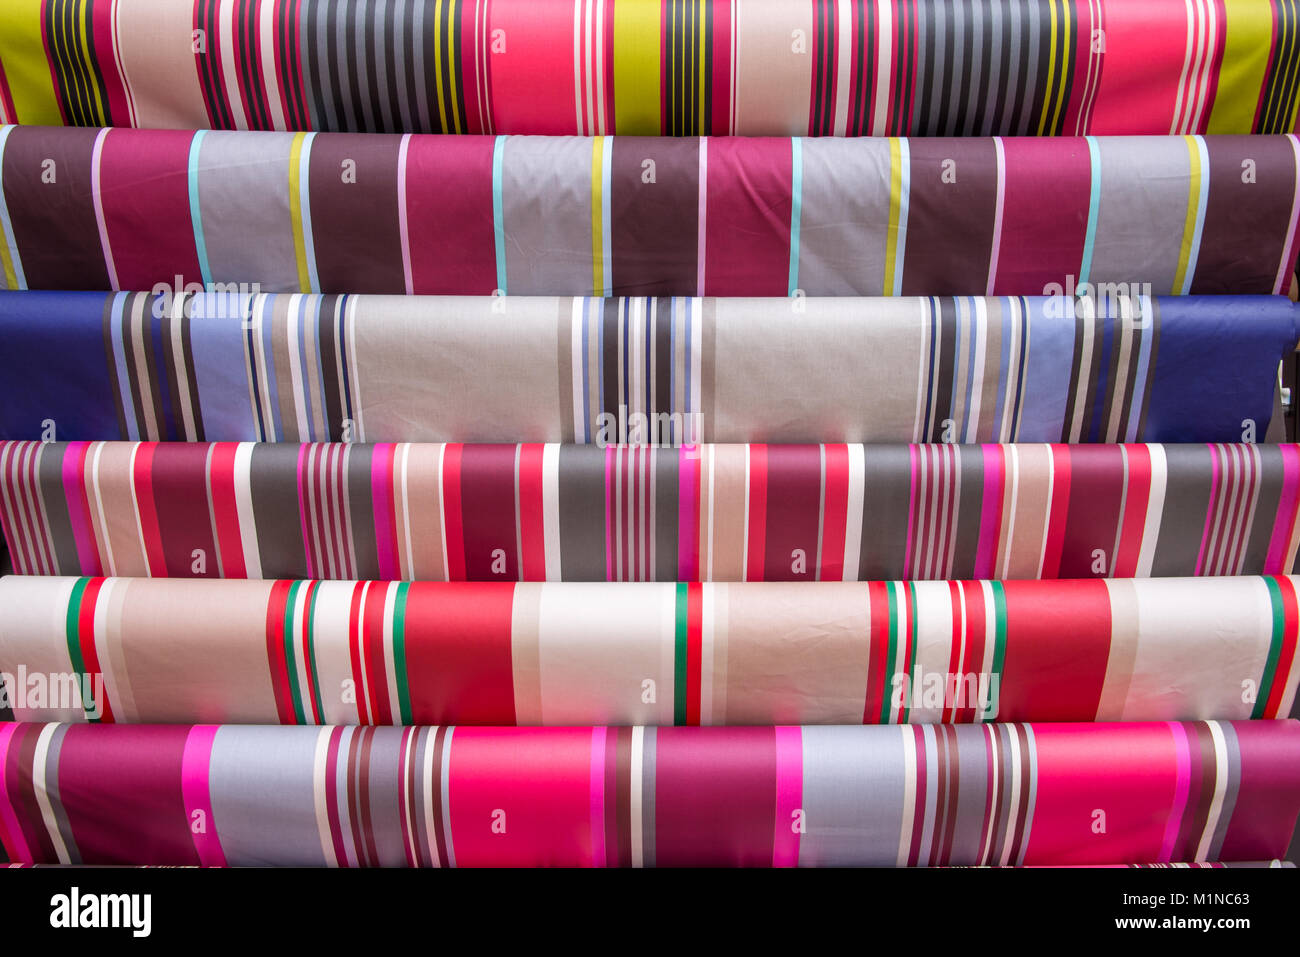 Traditional striped French Basque fabric display Stock Photo